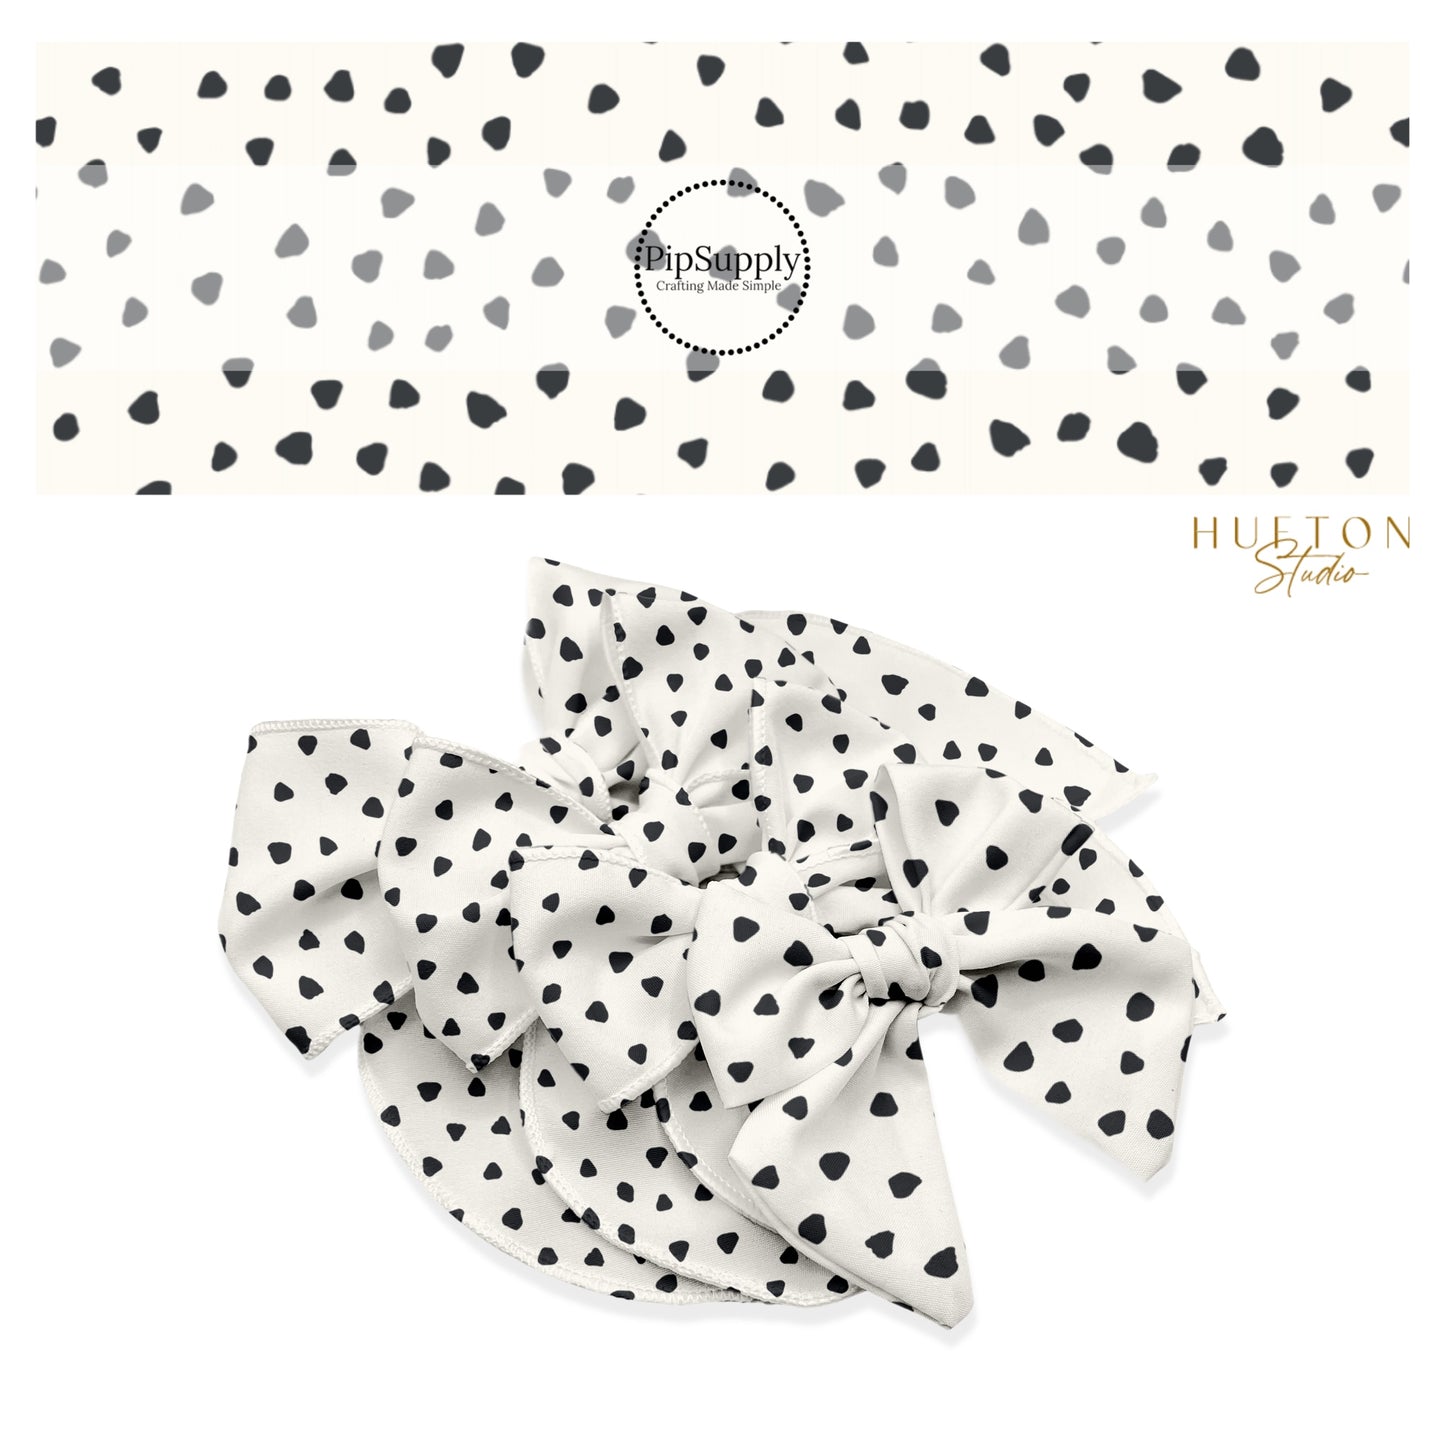 These speckled themed no sew bow strips can be easily tied and attached to a clip for a finished hair bow. These fun dot bow strips are great for personal use or to sell. The bow stripes features small black speckled dots on ivory.